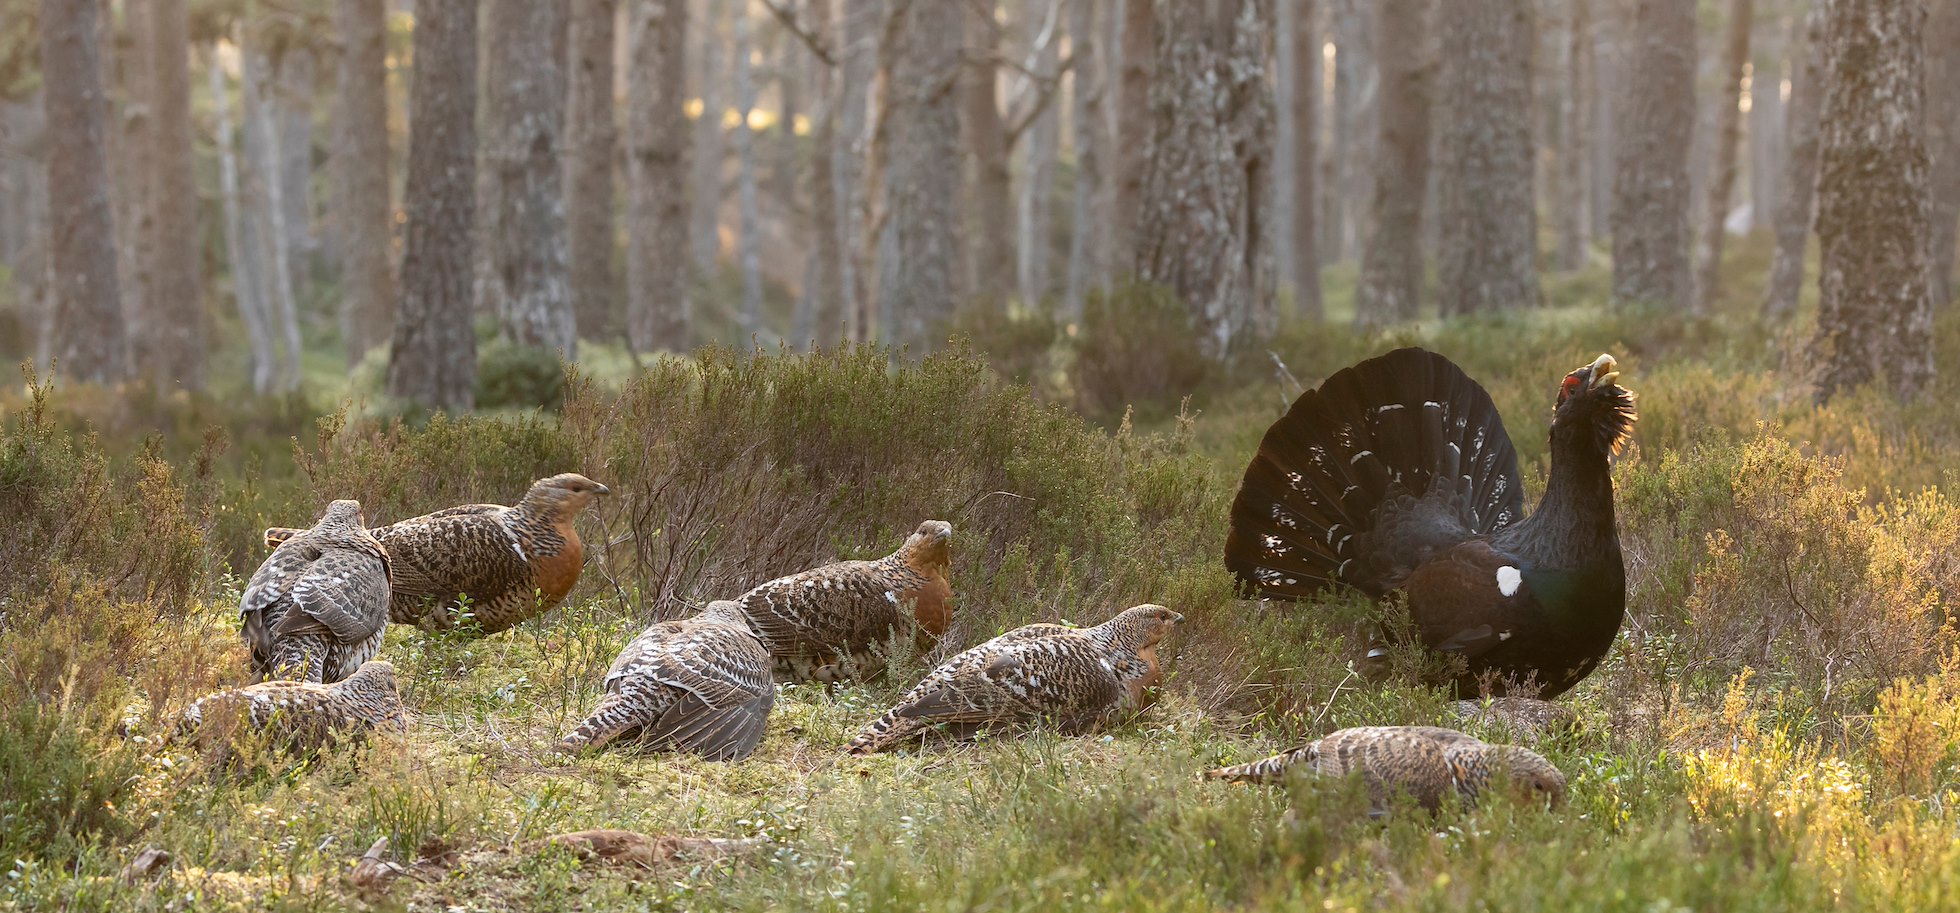 Capercaillie, Tetrao urogallus, male displaying surrounded by hens on lek at sunrise, April